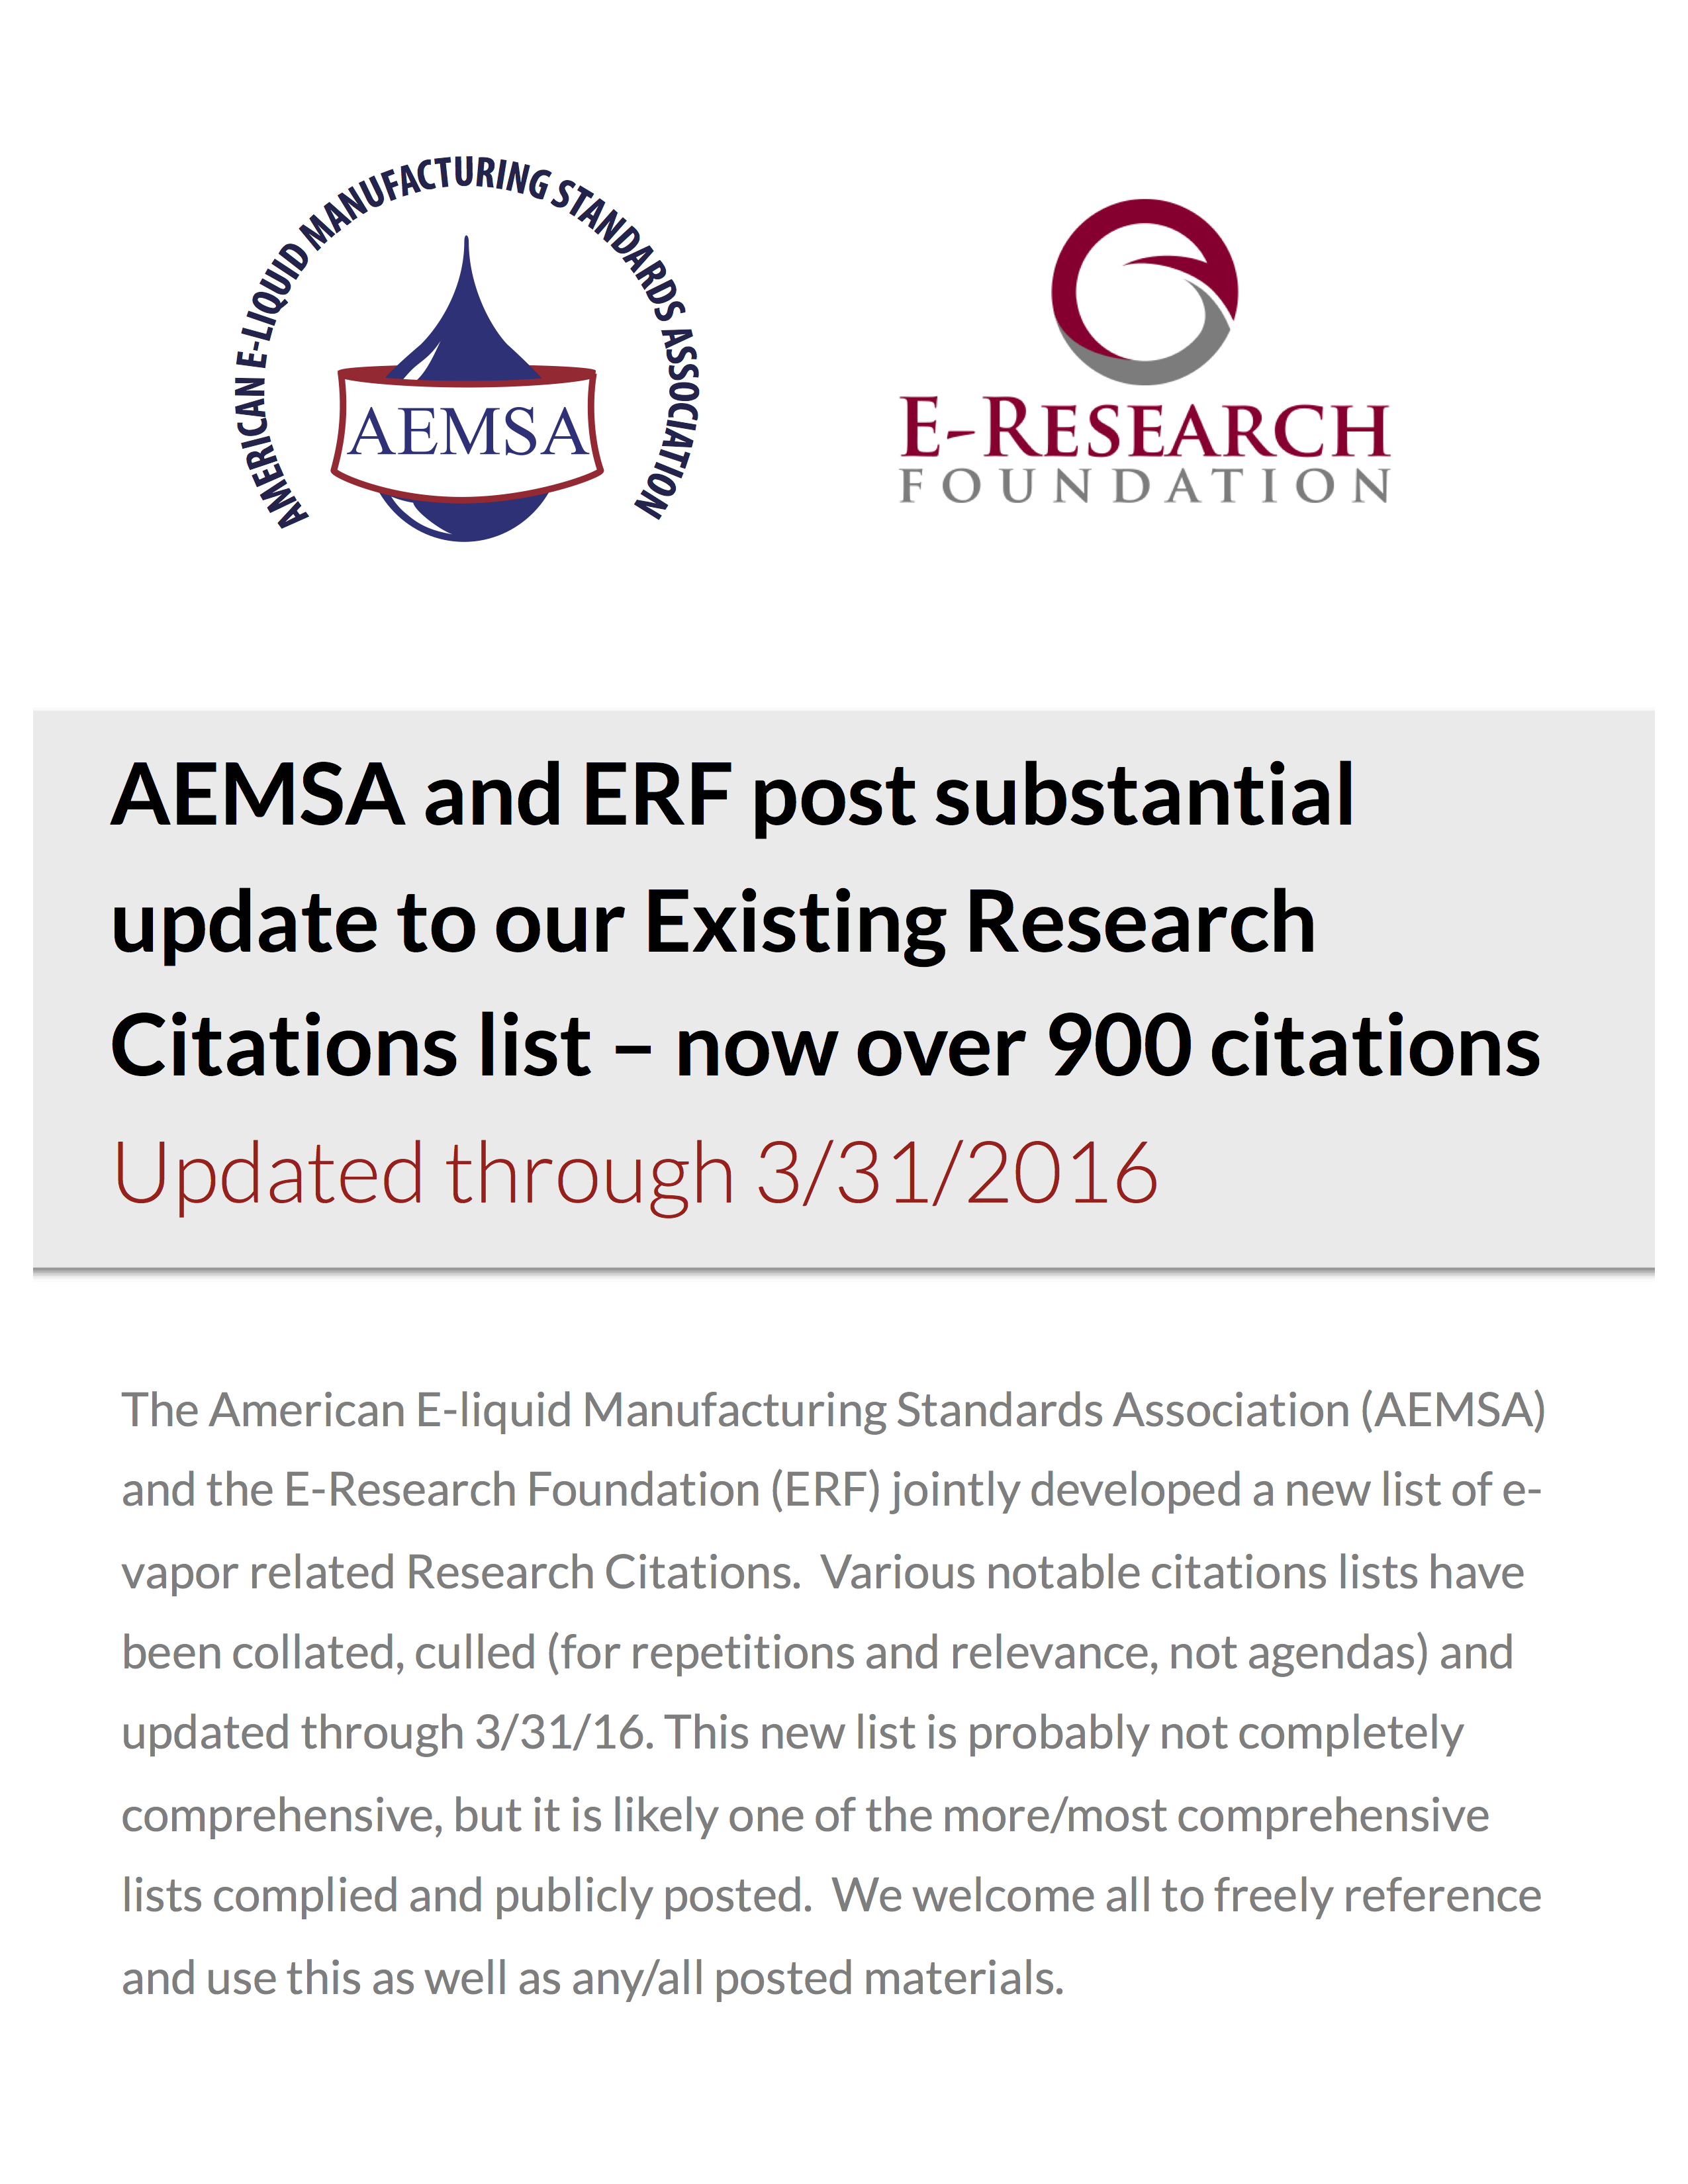 Existing Research Citations